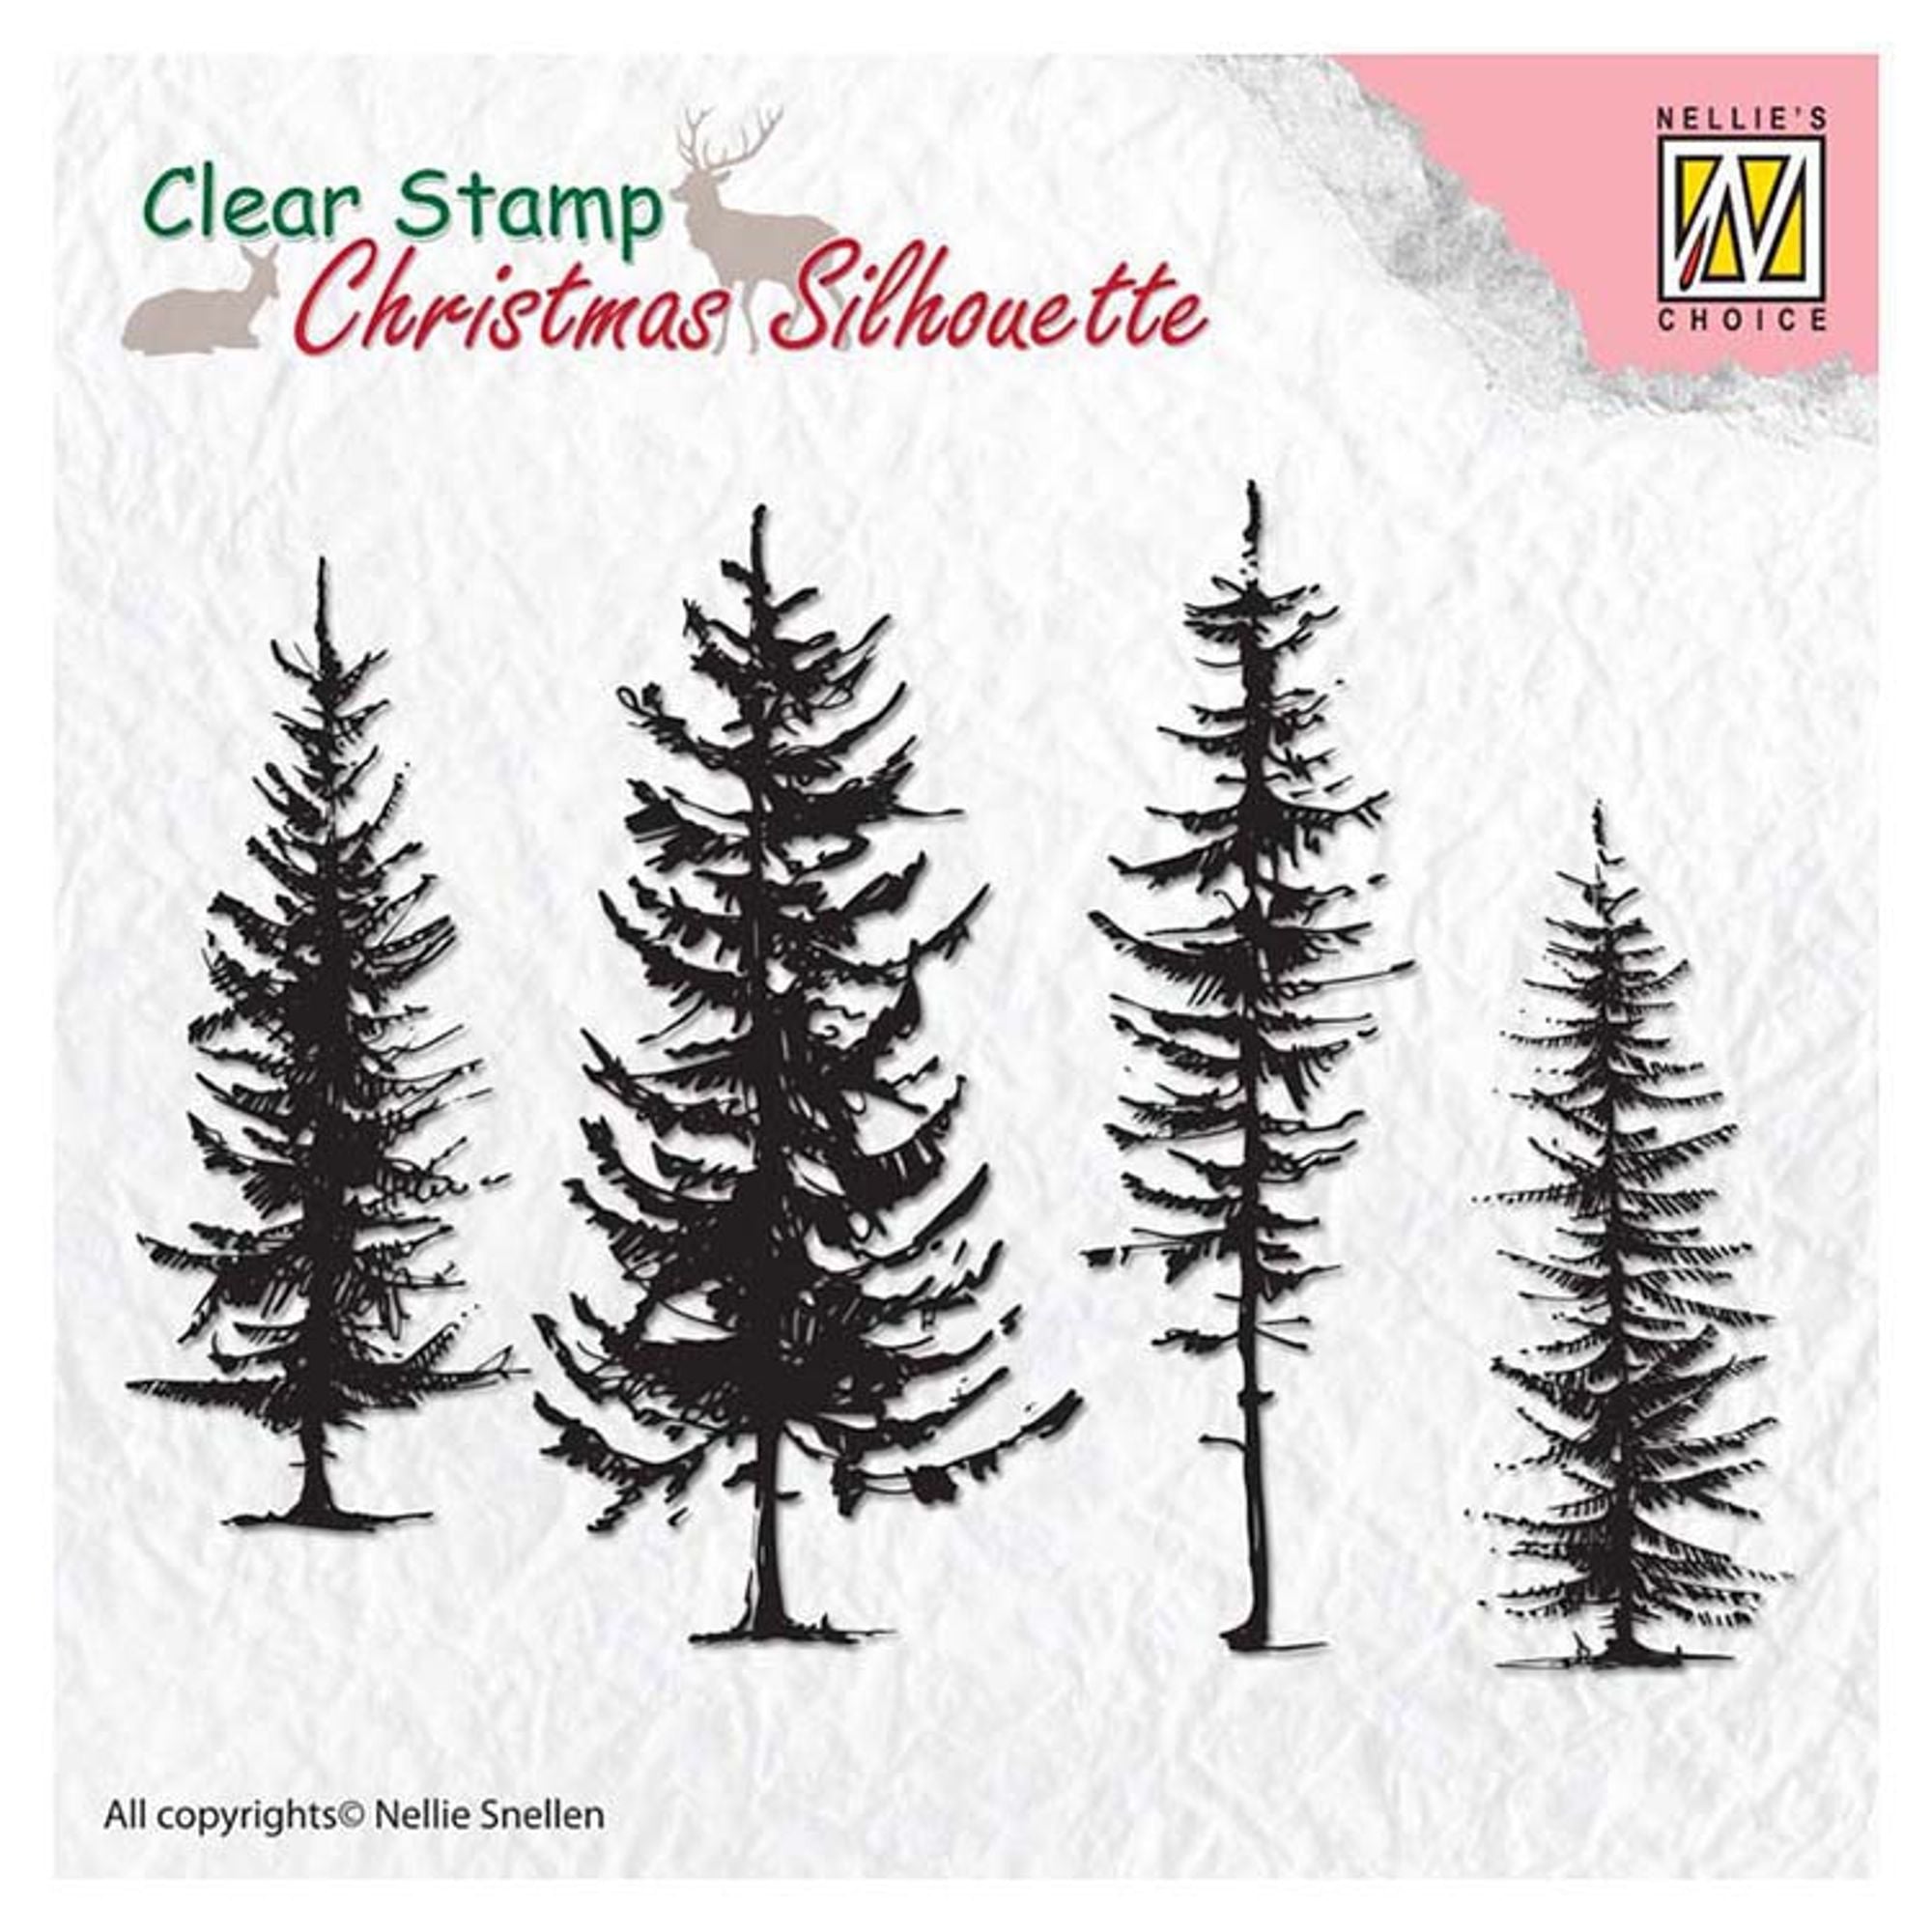 Nellie's Choice Clear Stamp Christmas Silhouette Pine Trees